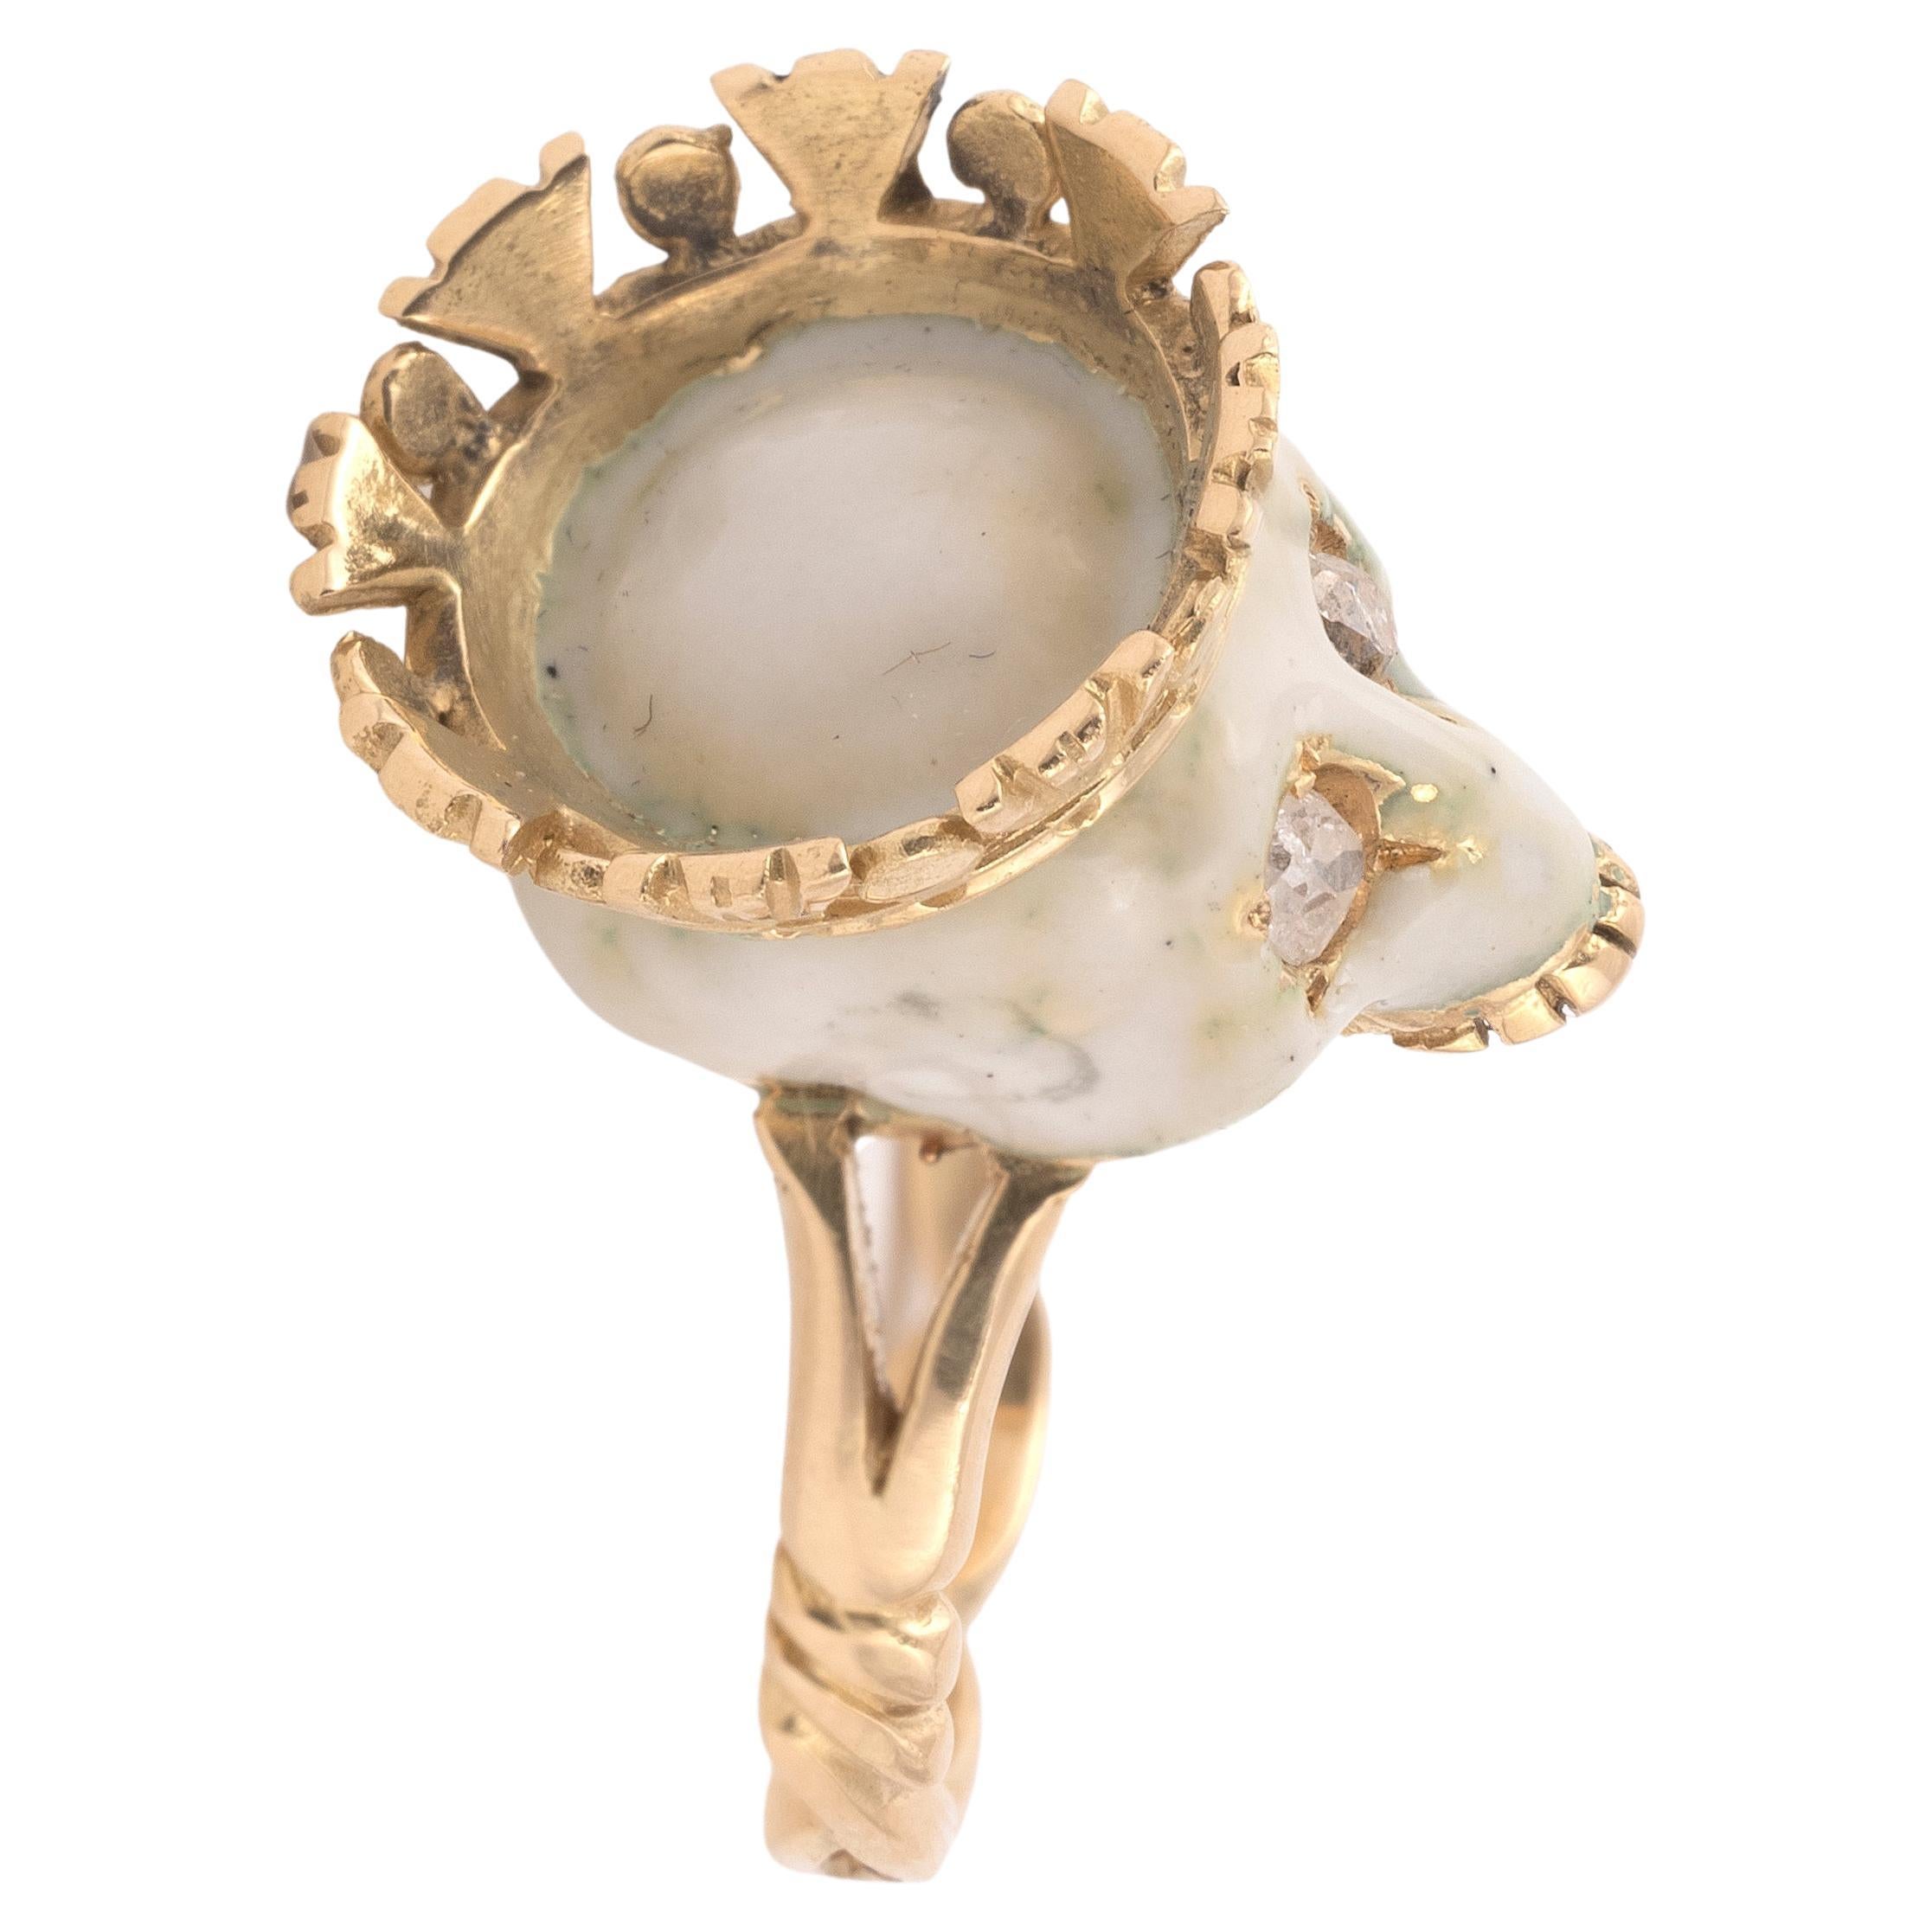 An enamel and diamond skull ring, the centre crowned skull and cream enamel with diamond-set eyes, to gold split shoulders and twisted designed shank, estimated total diamond weight 0.3cts, made by Gaetano Chiavetta
Size 7
Weight: 9,13gr